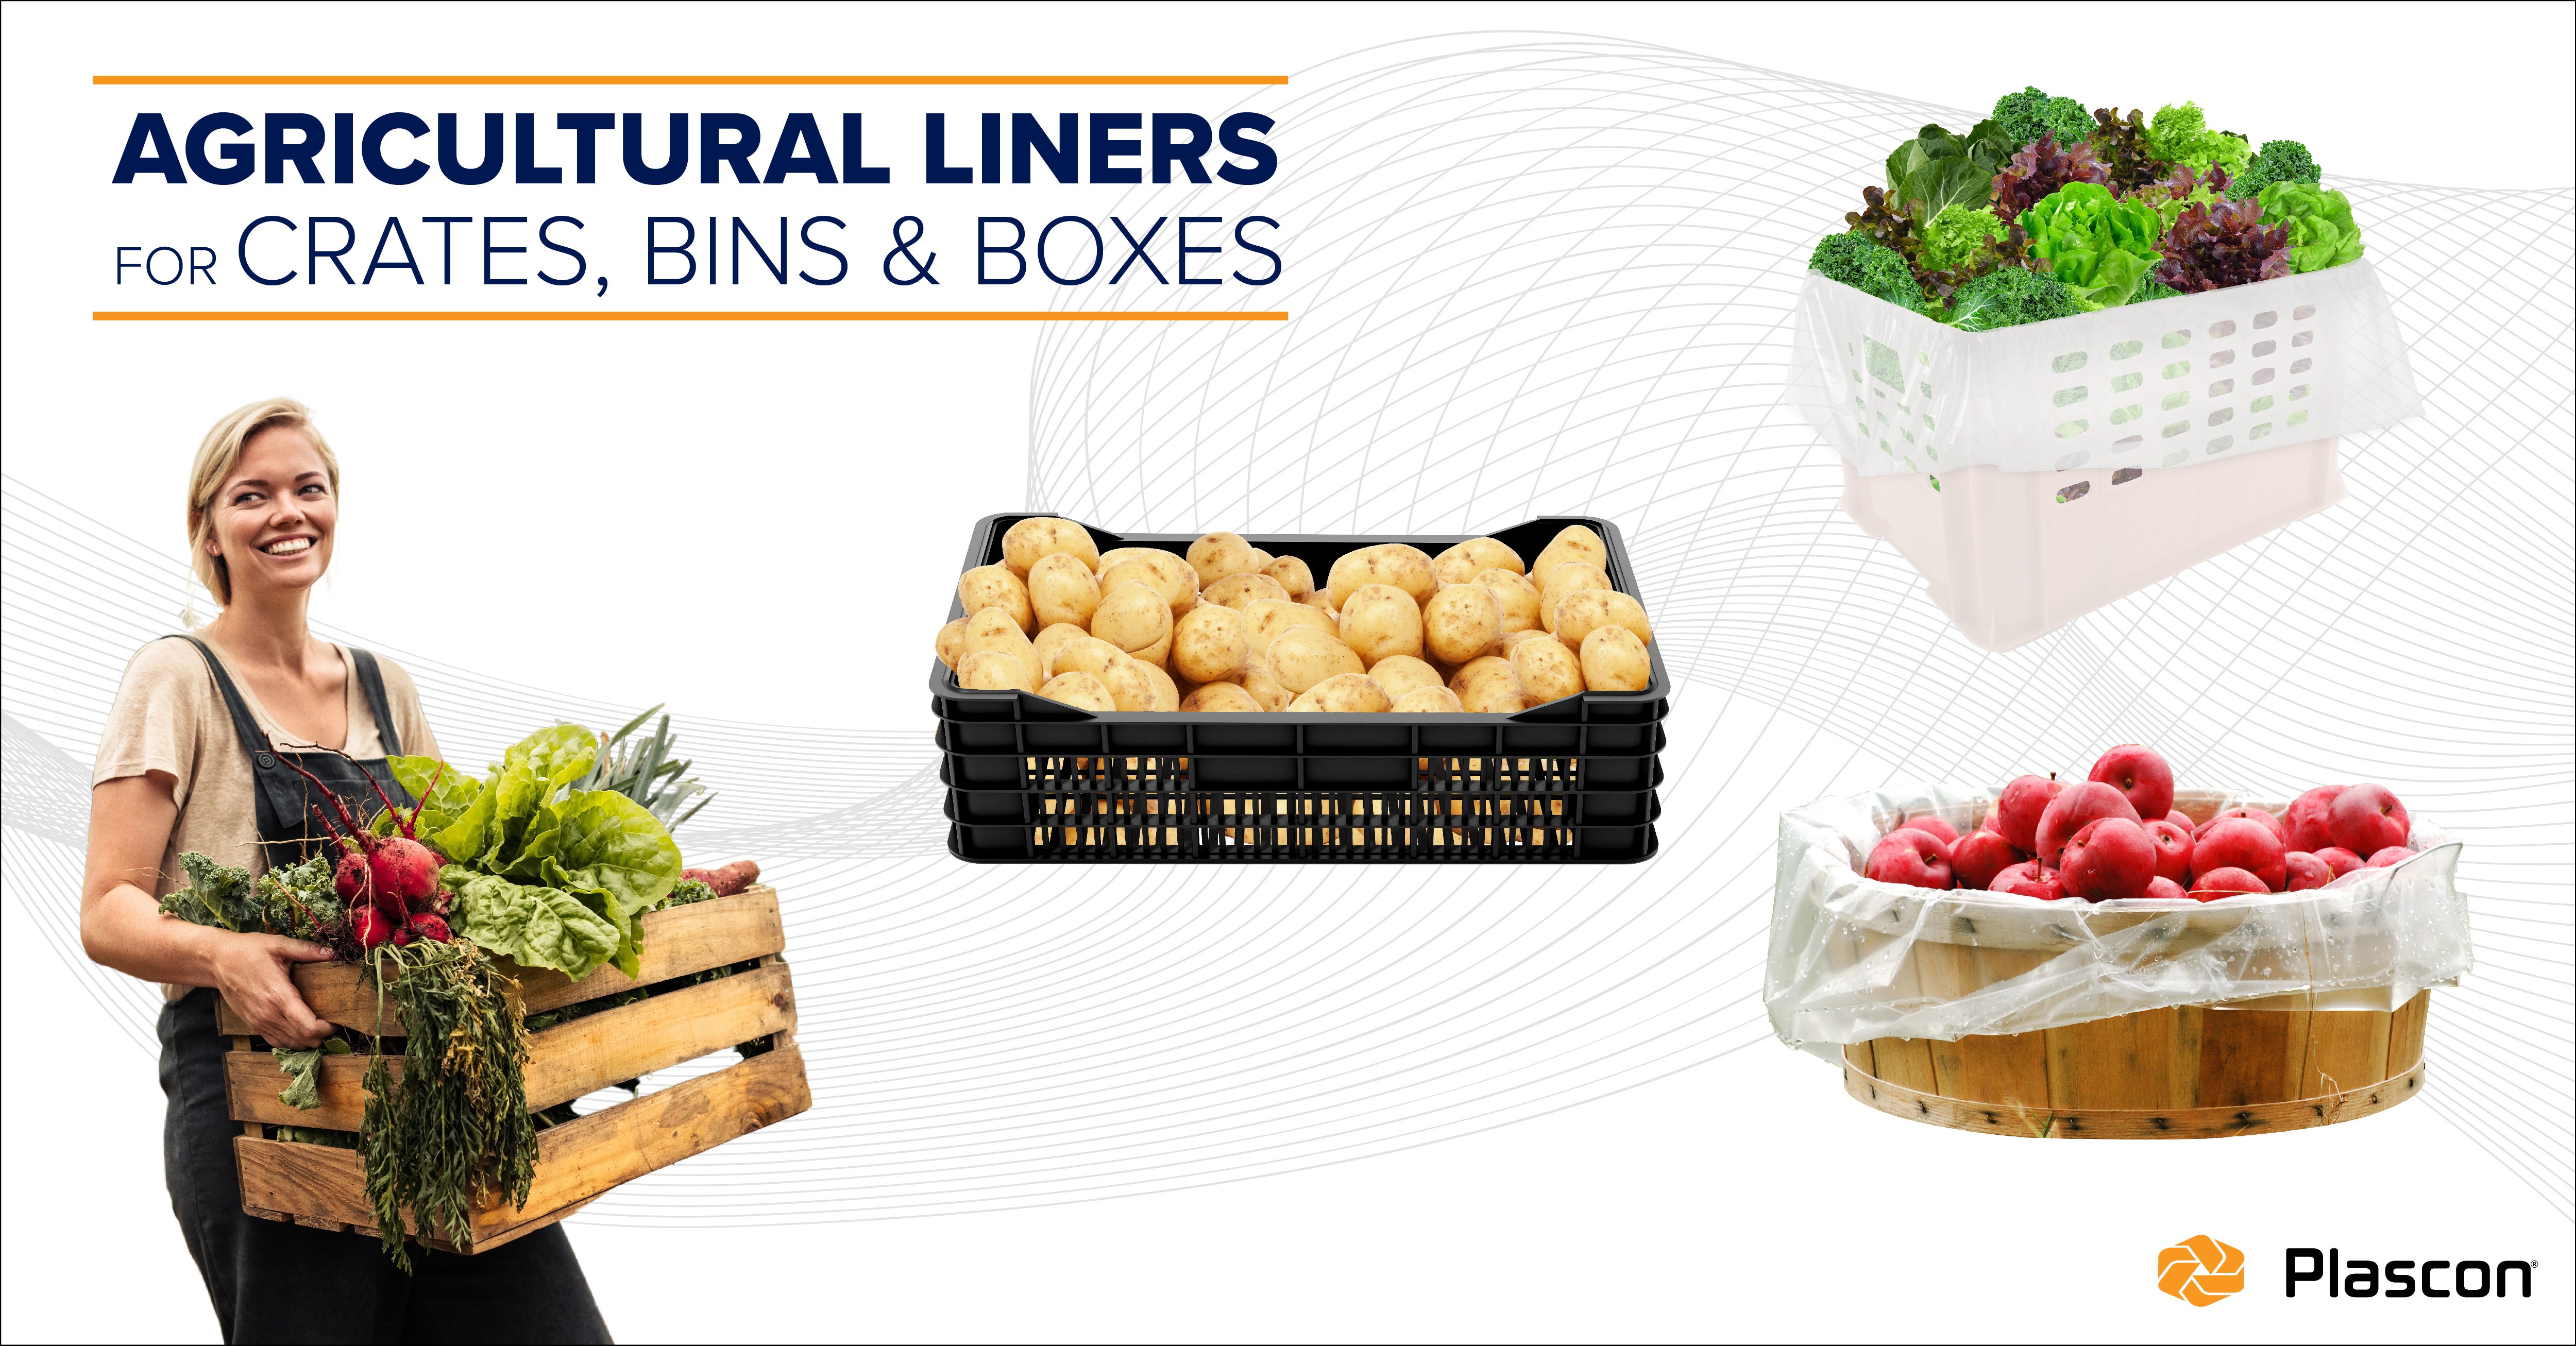 Agricultural food grade liners for bins, crates, and boxes